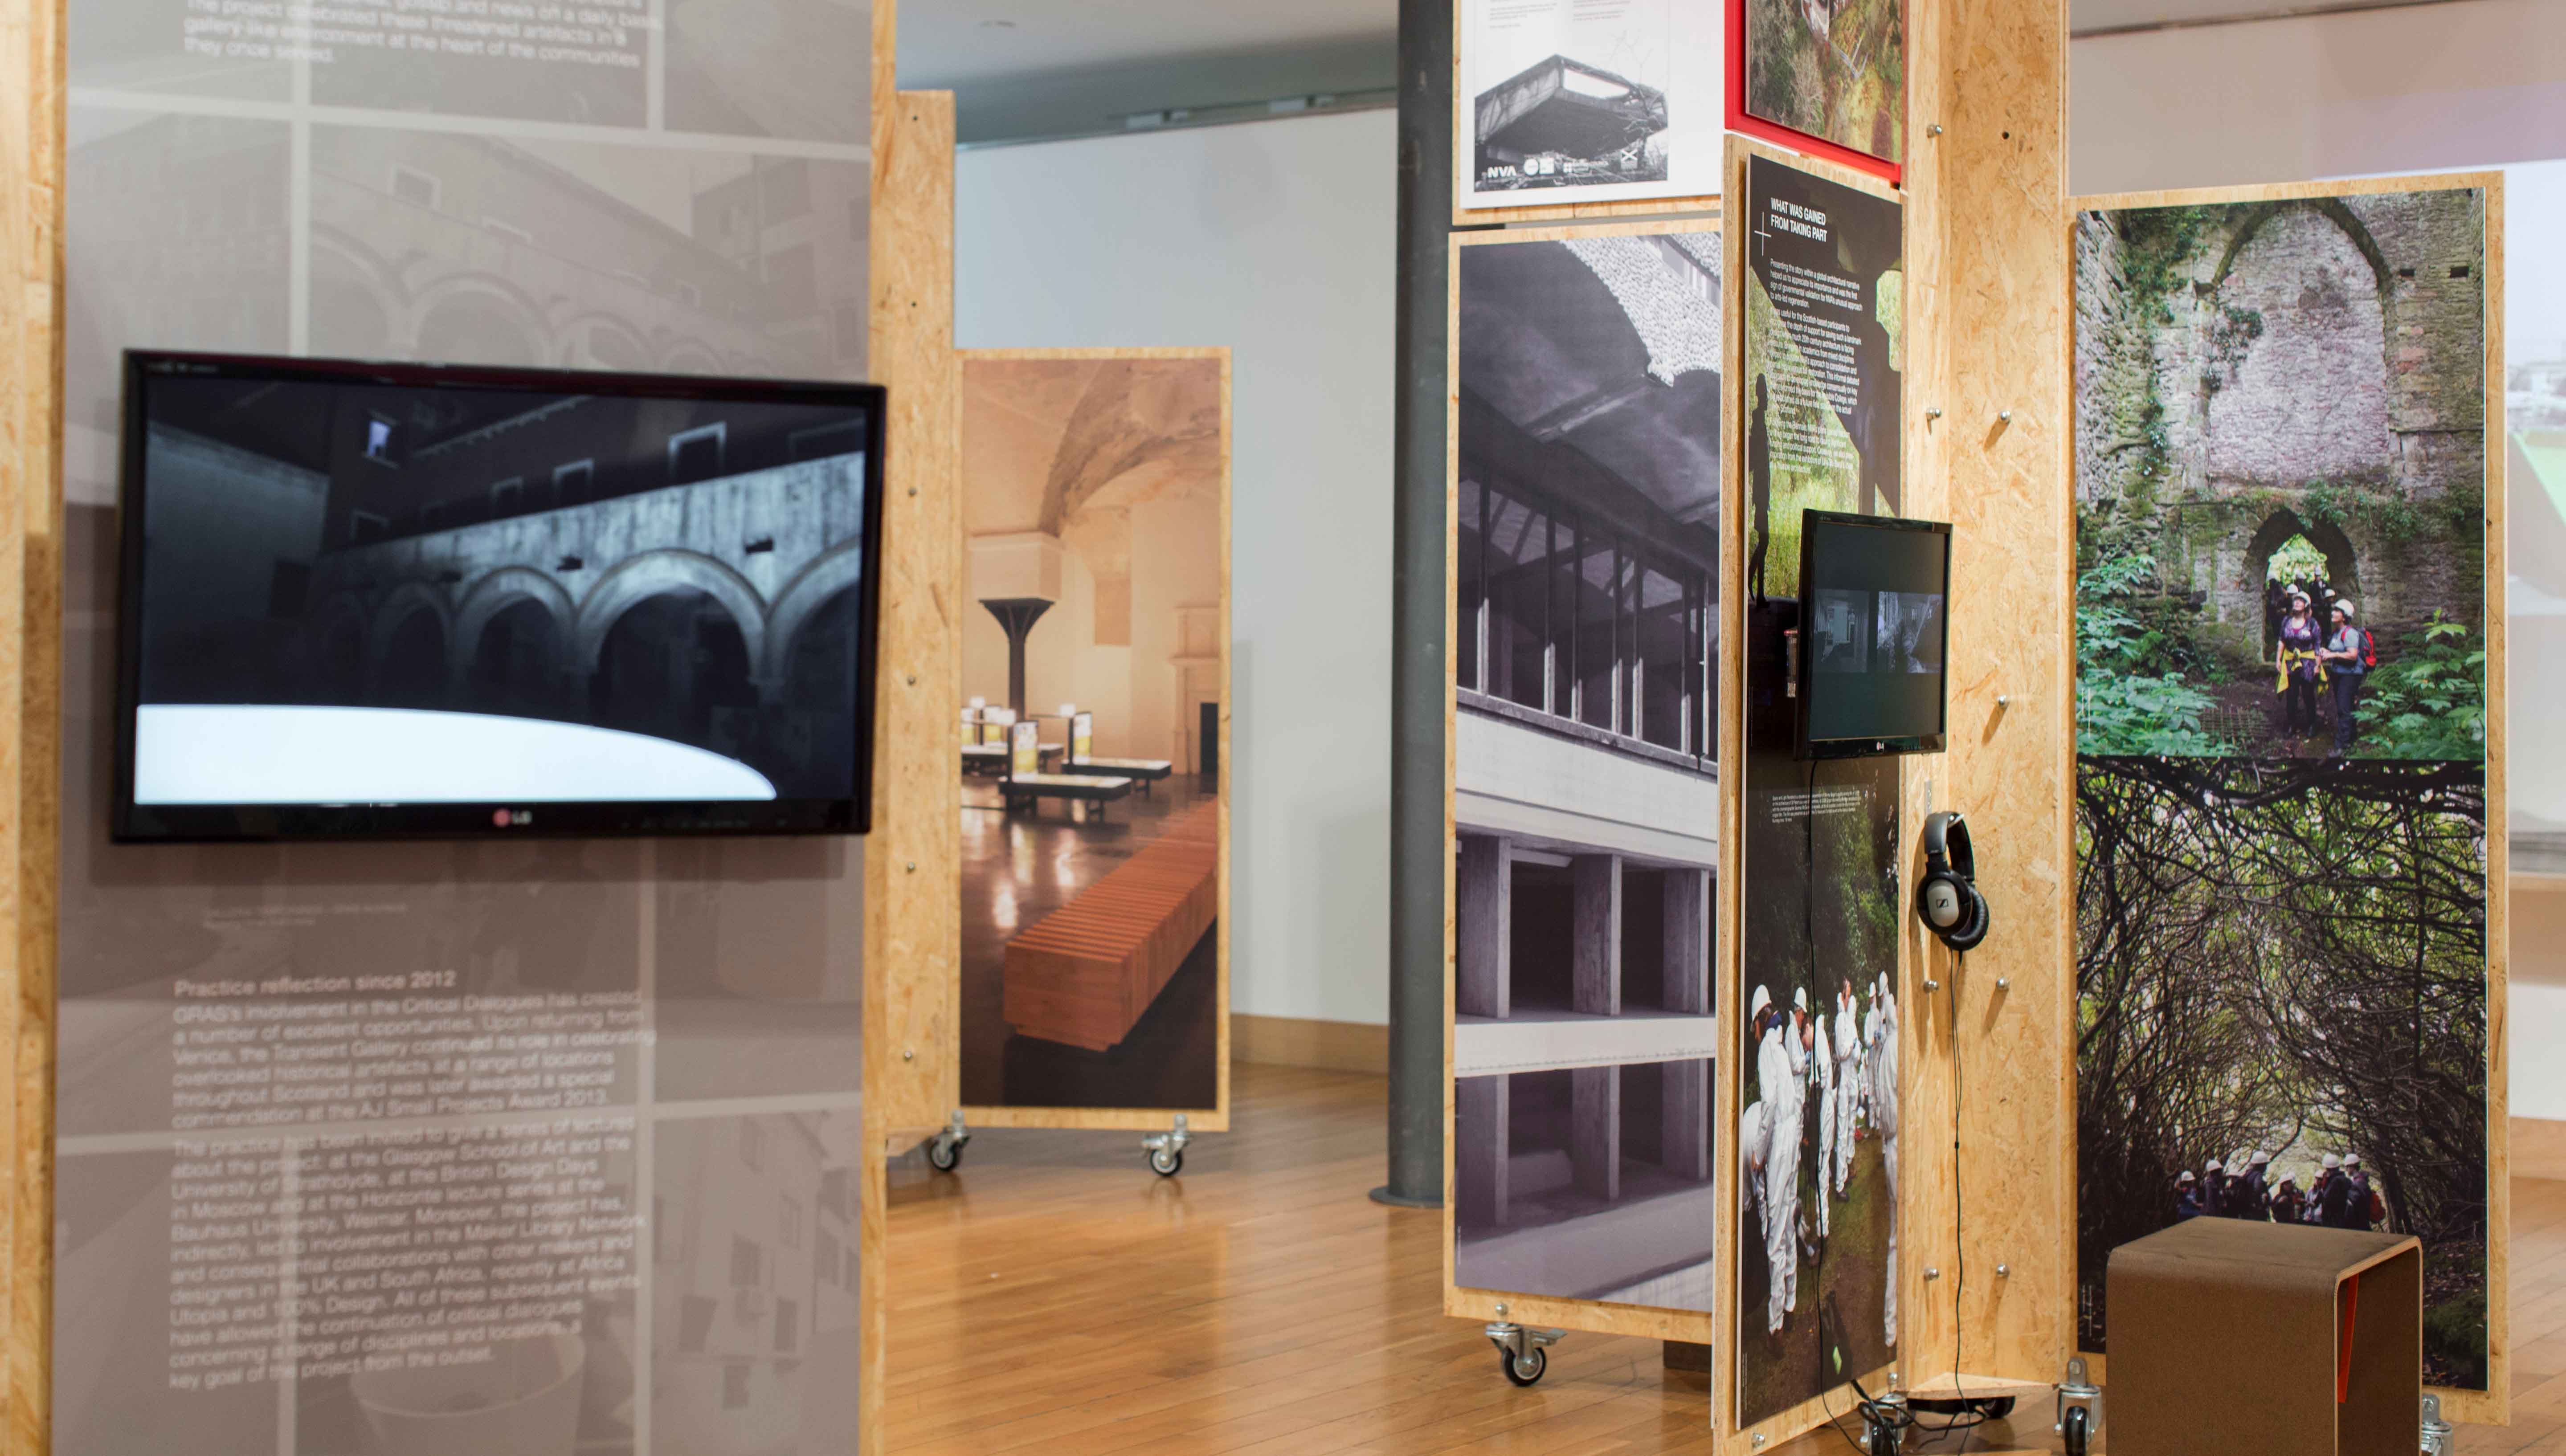 Indoor space of Past and Future exhibition with floor to ceiling room separators featuring images and tv screens.